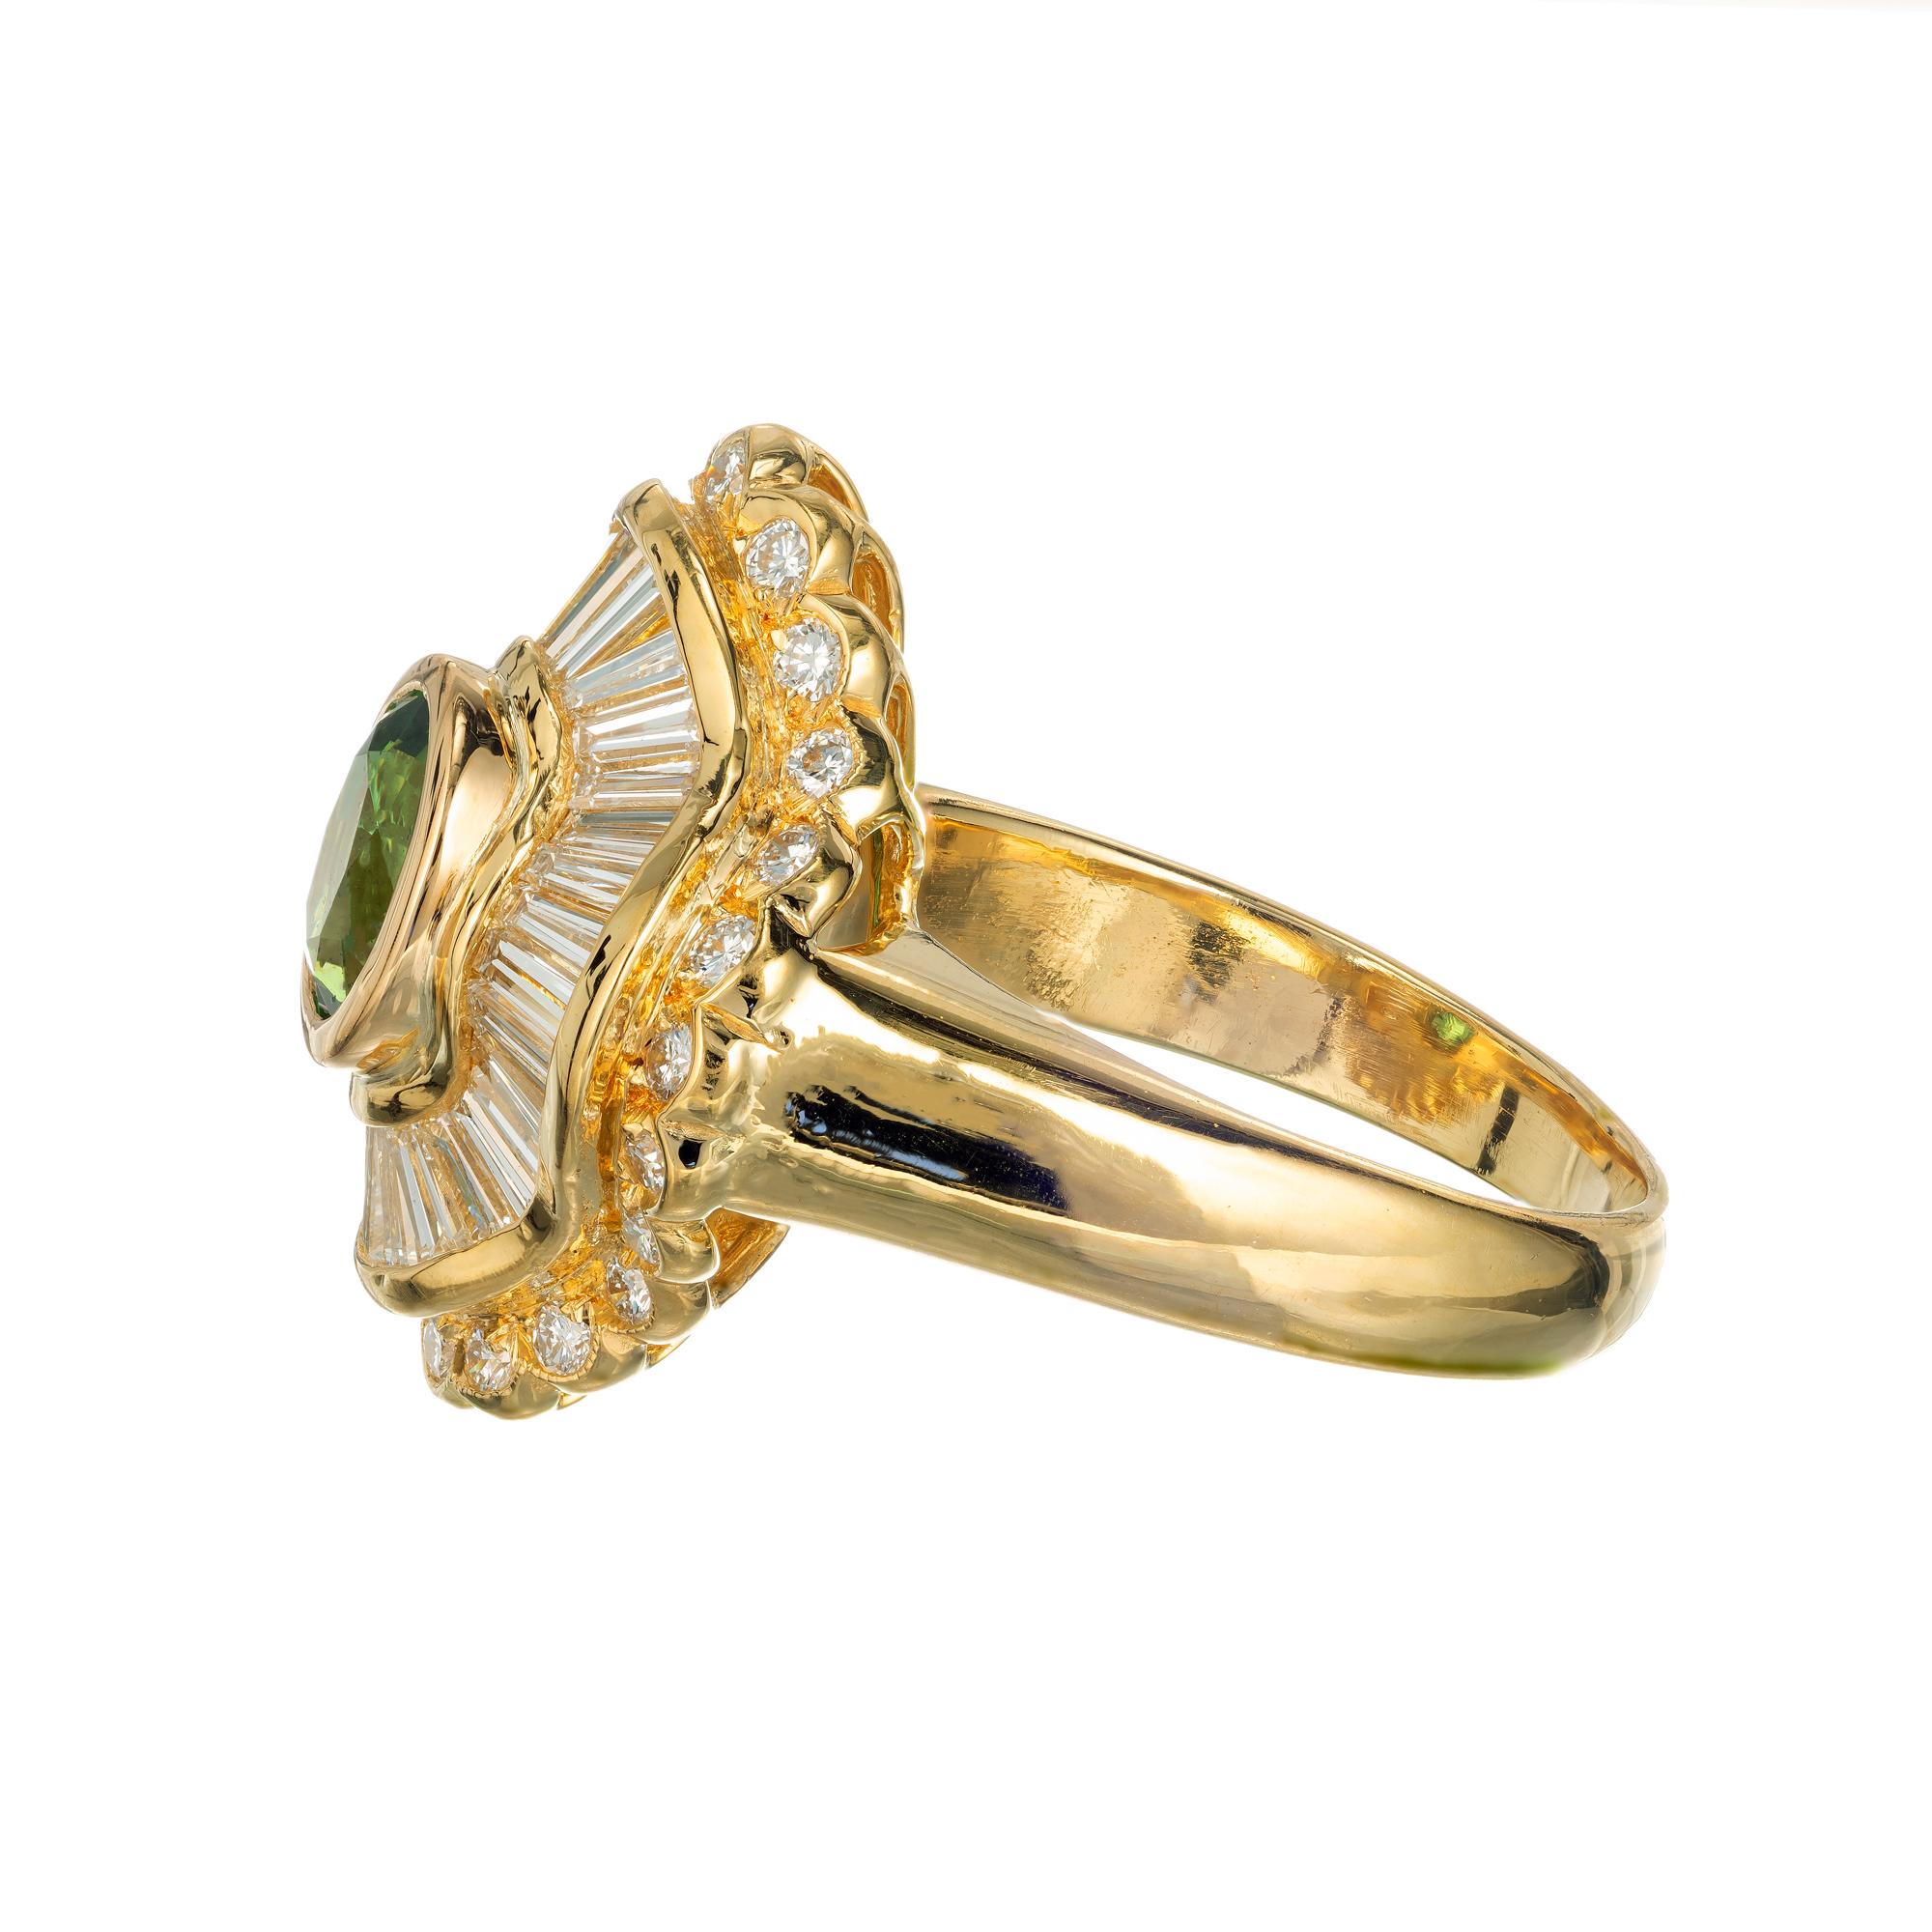 GIA Certified 1.38 Carat Tsavorite Garnet Diamond Gold Cocktail Ring In Good Condition For Sale In Stamford, CT